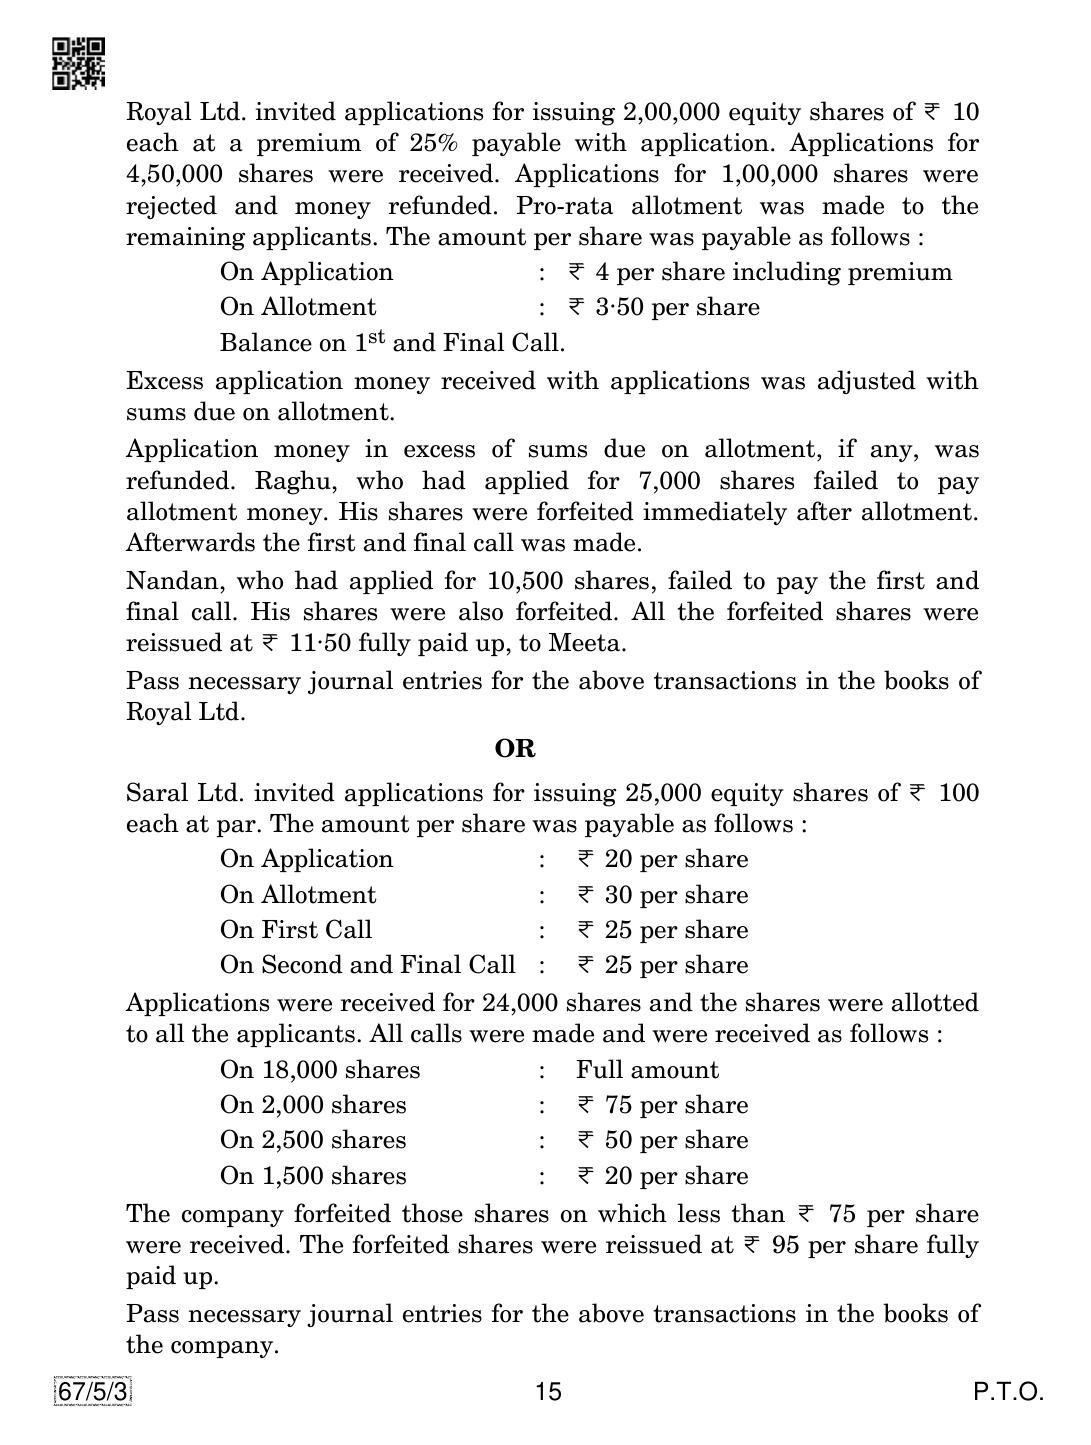 CBSE Class 12 67-5-3 Accountancy 2019 Question Paper - Page 15